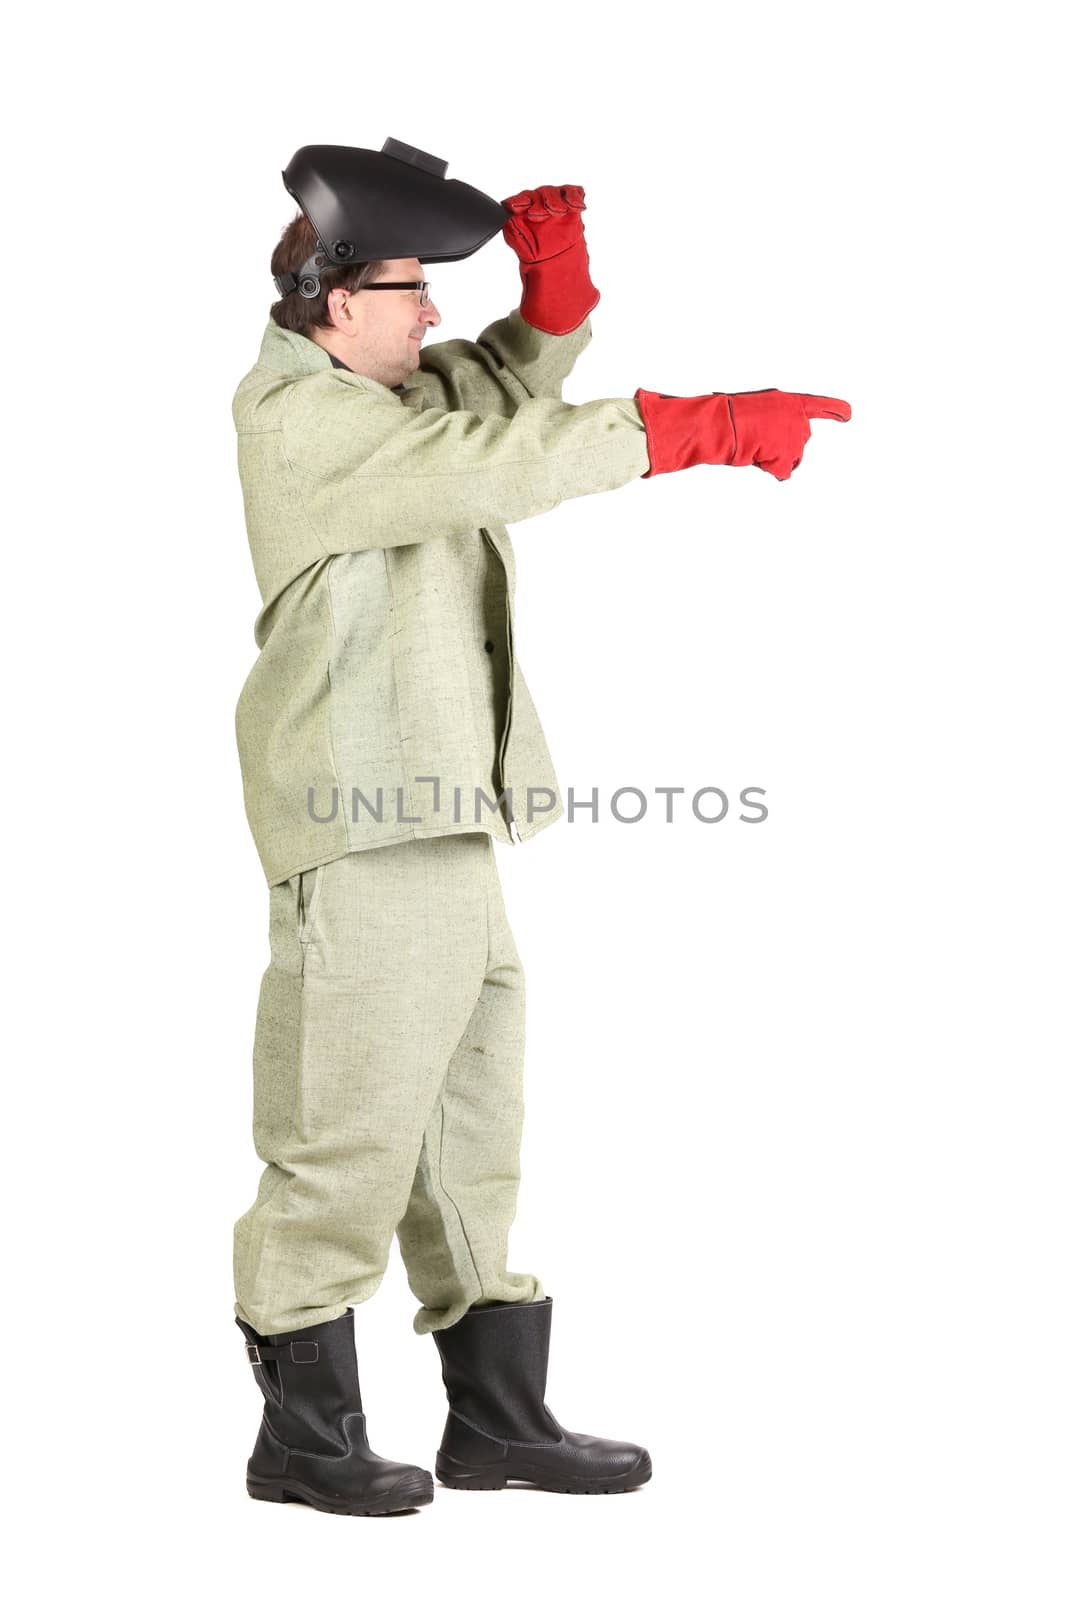 Welder shows something. Isolated on a white background.